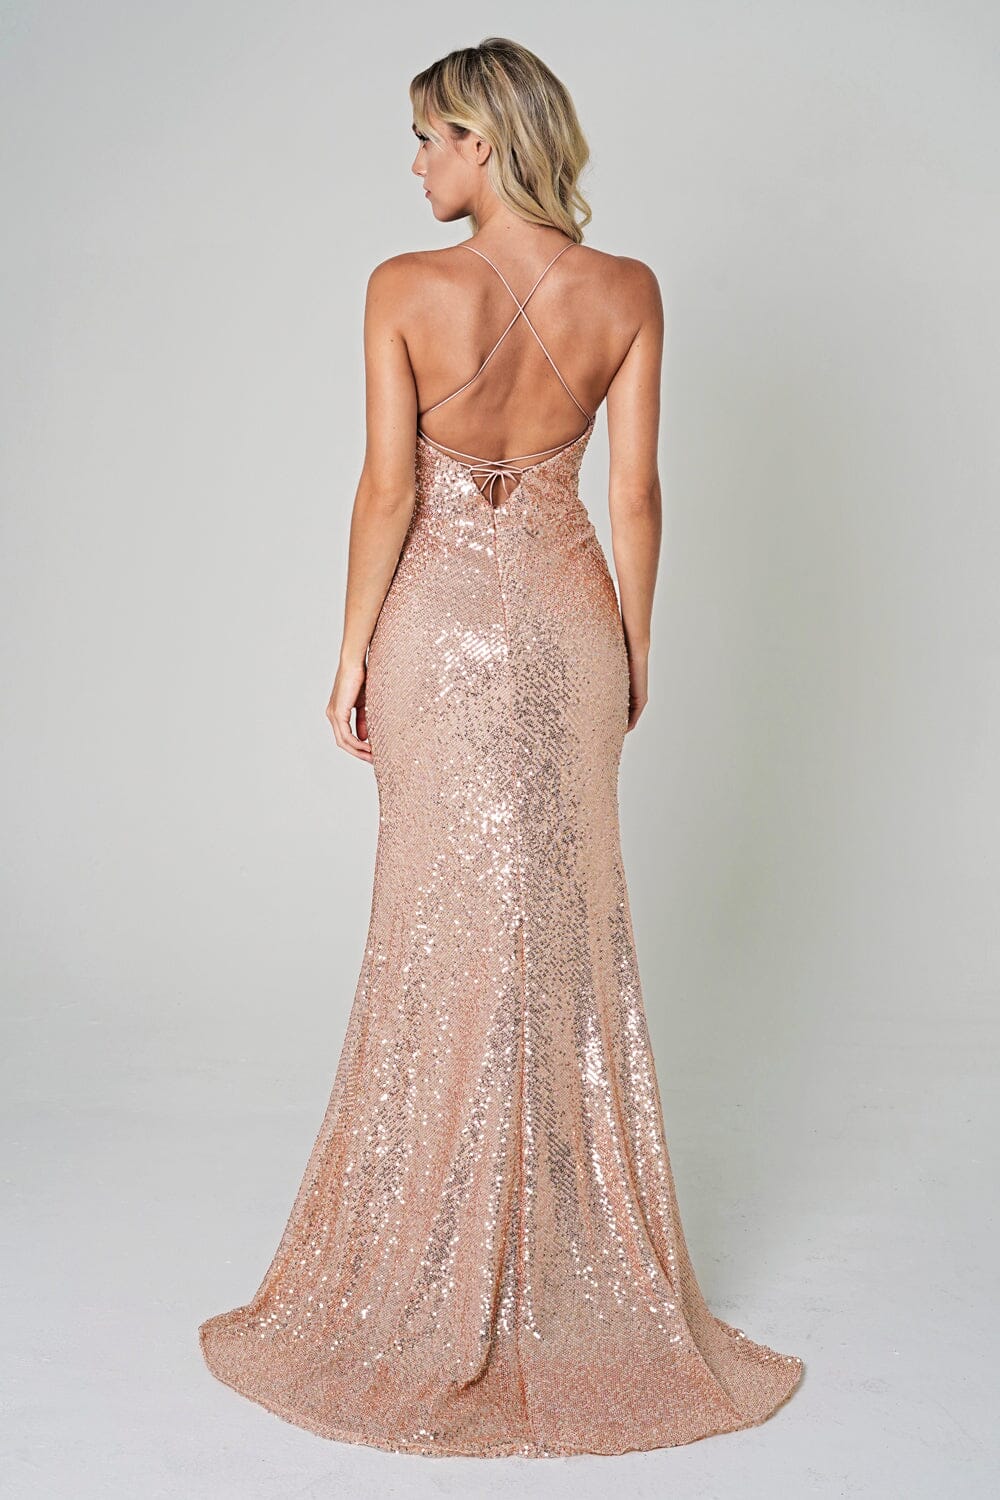 Sequin Fitted Sleeveless Slit Gown by Amelia Couture BZ011